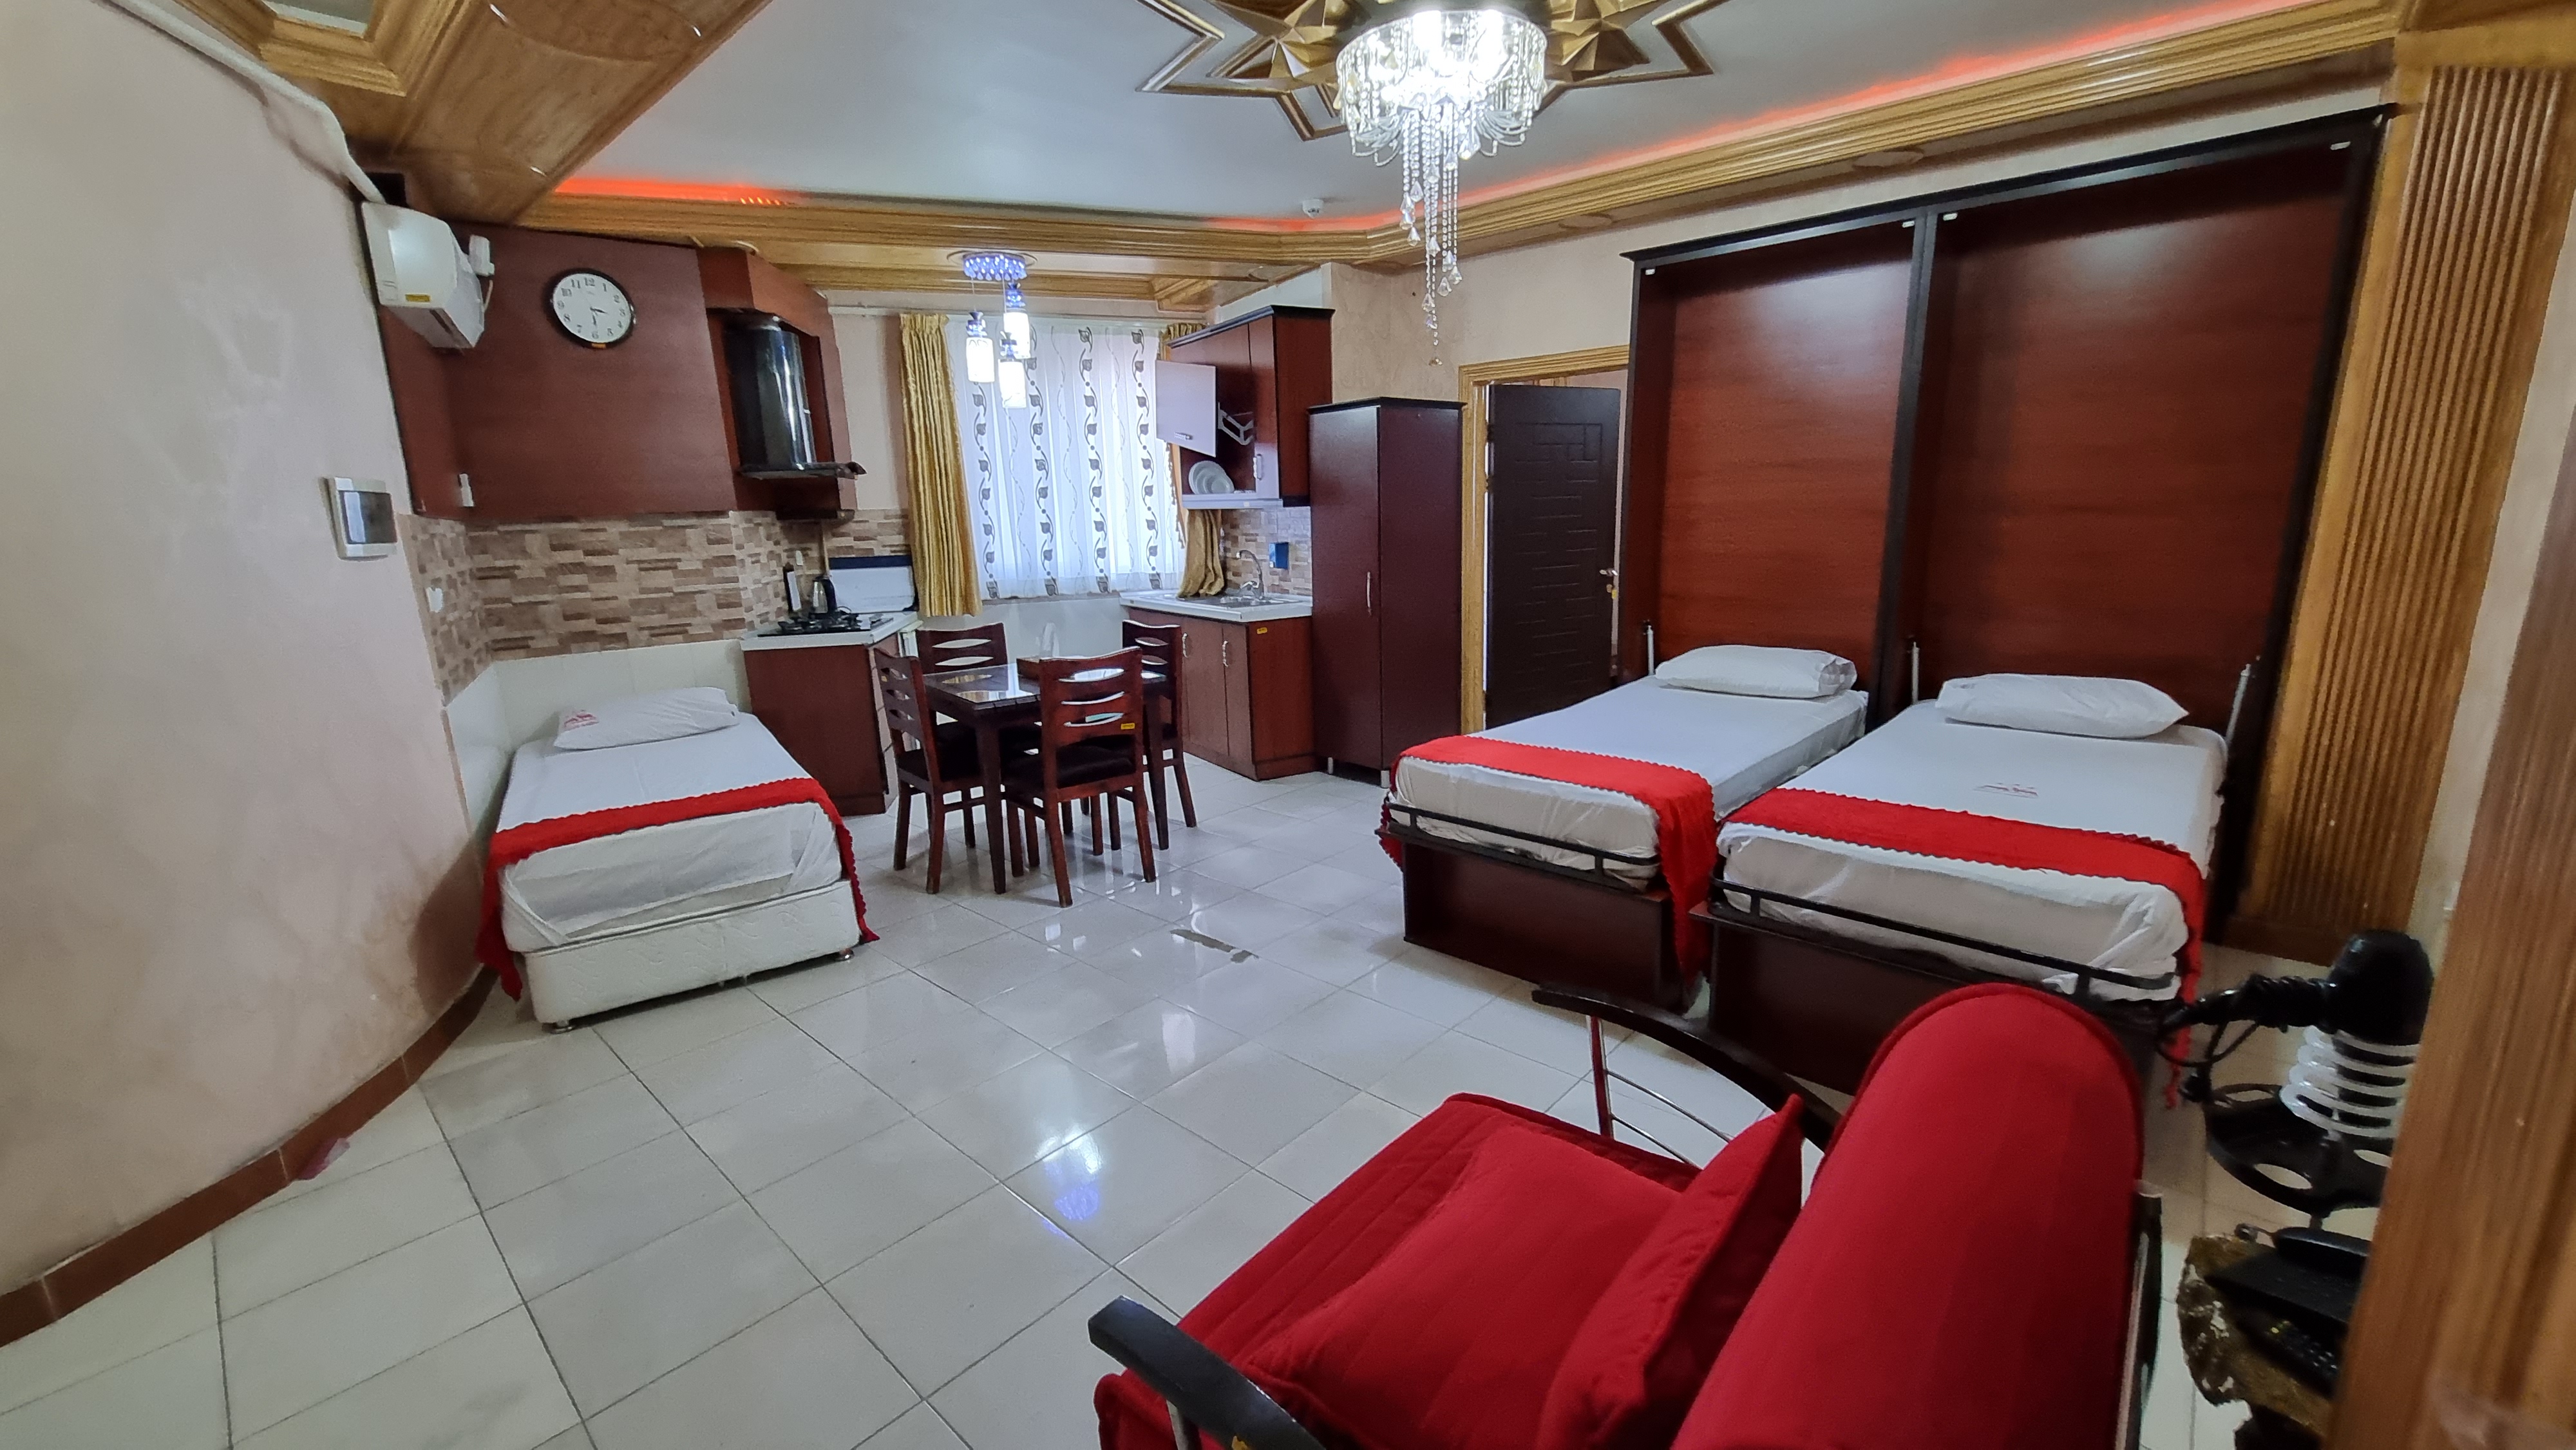 reservation  40Meter  for  3 person Room Sabouri apartment hotel